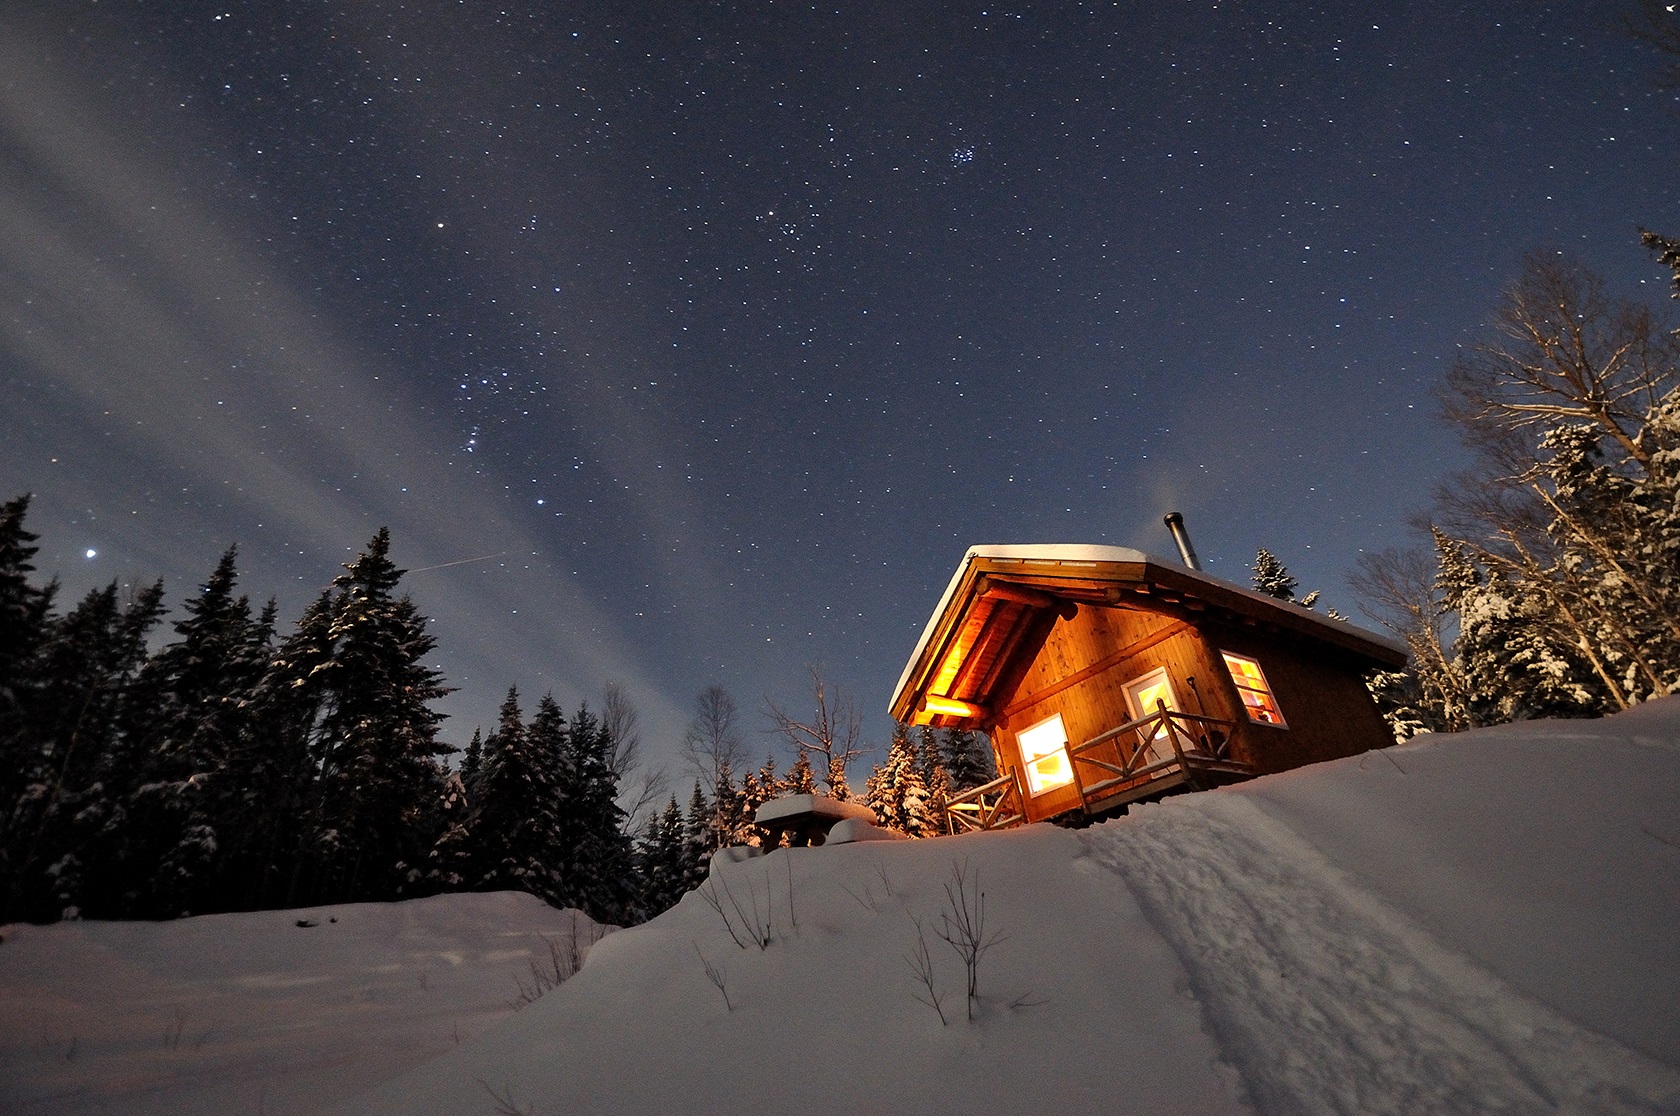 A winter night on Mont Gosford, Quebec, Canada